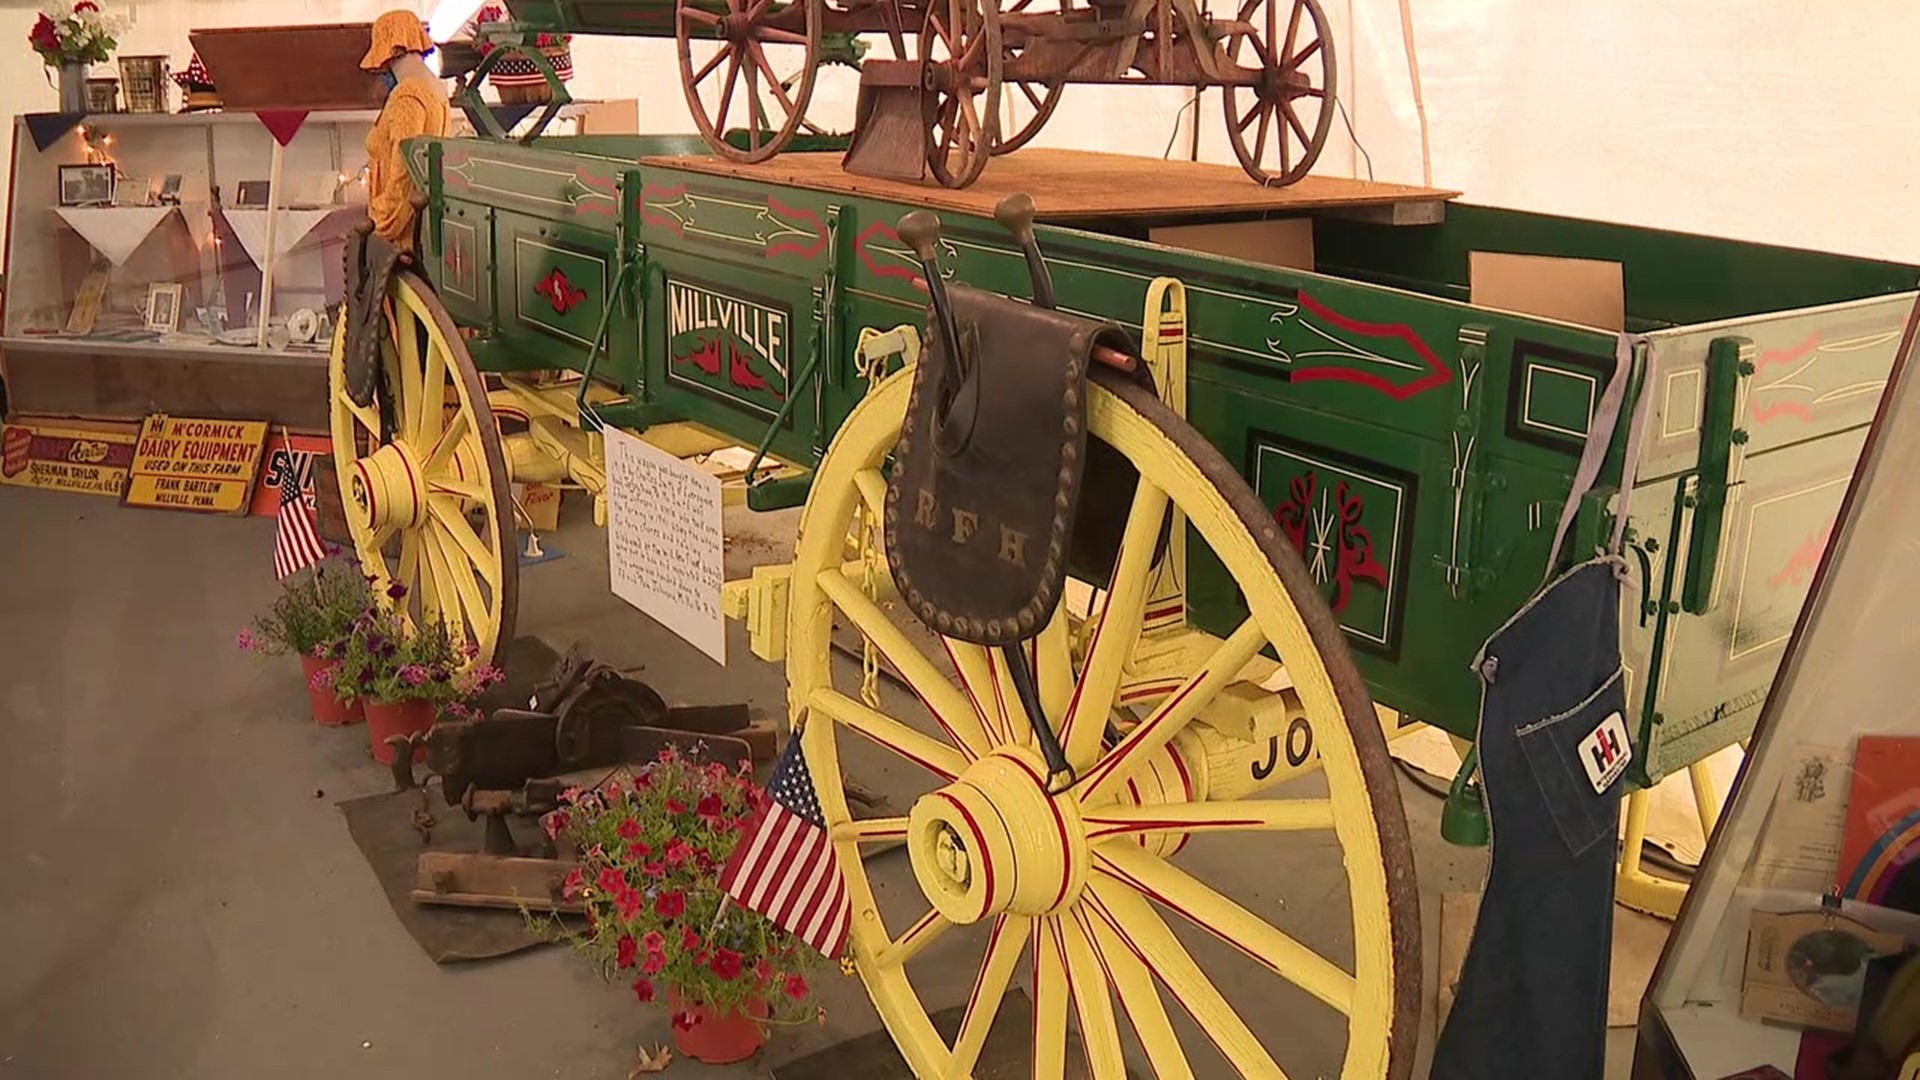 Millville is celebrating its 250th anniversary and one group set up a tent filled with pieces of the borough's history.